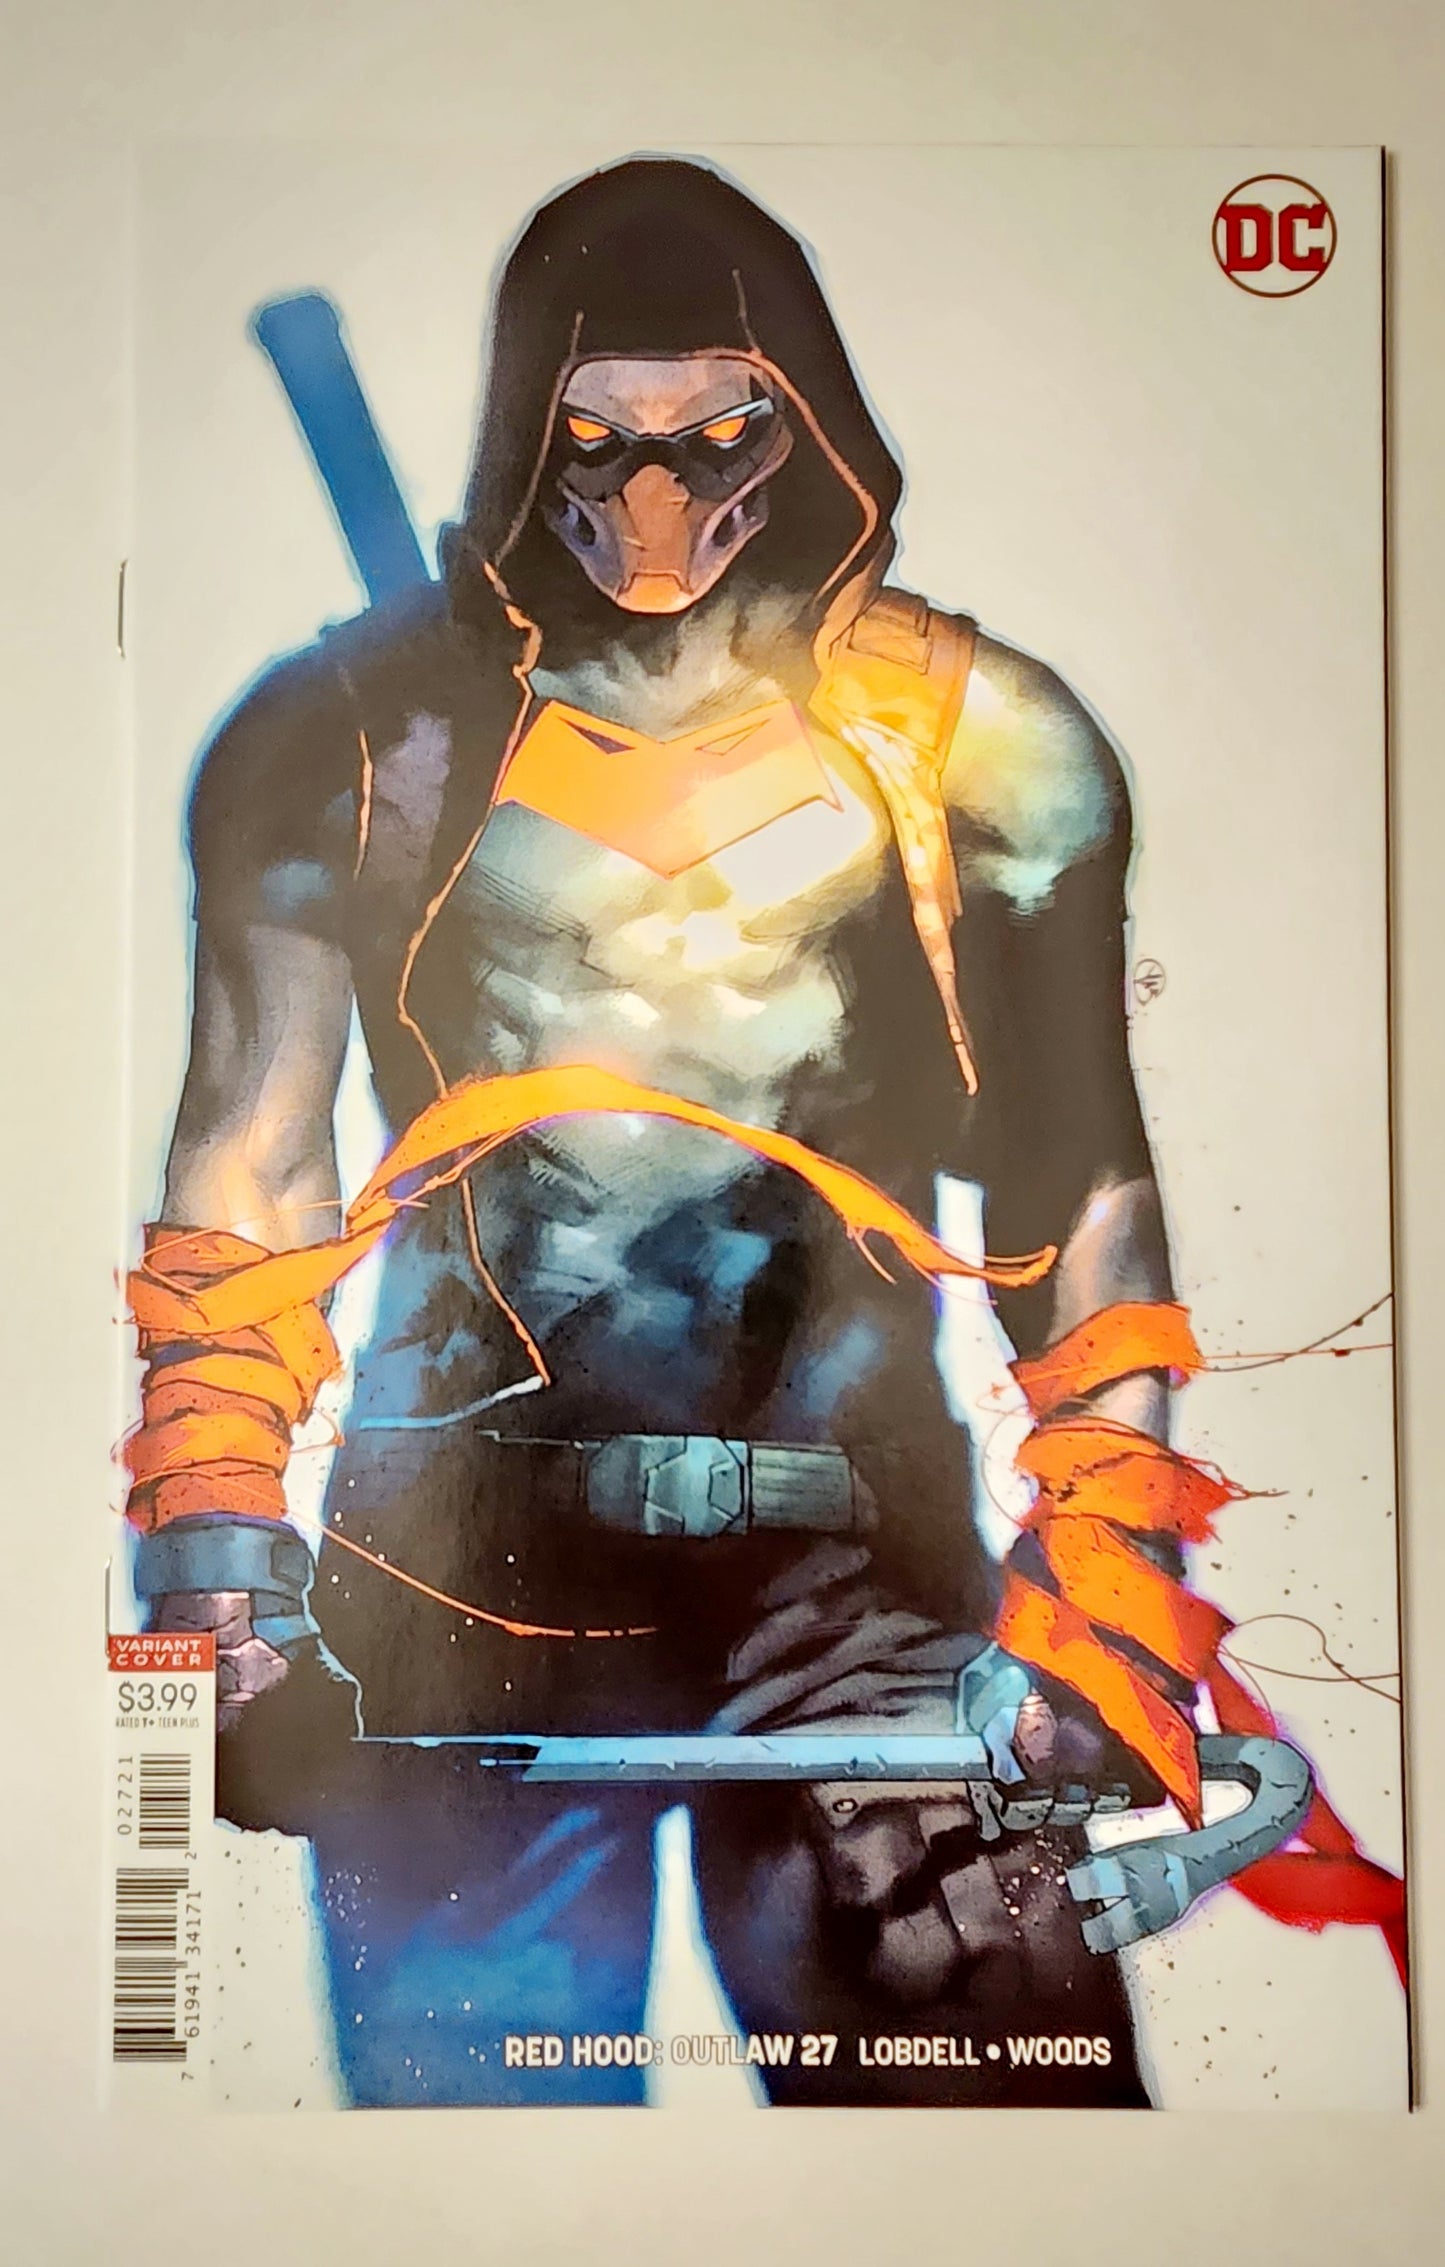 Red Hood And the Outlaws (Vol. 2) #27 Variant (NM)